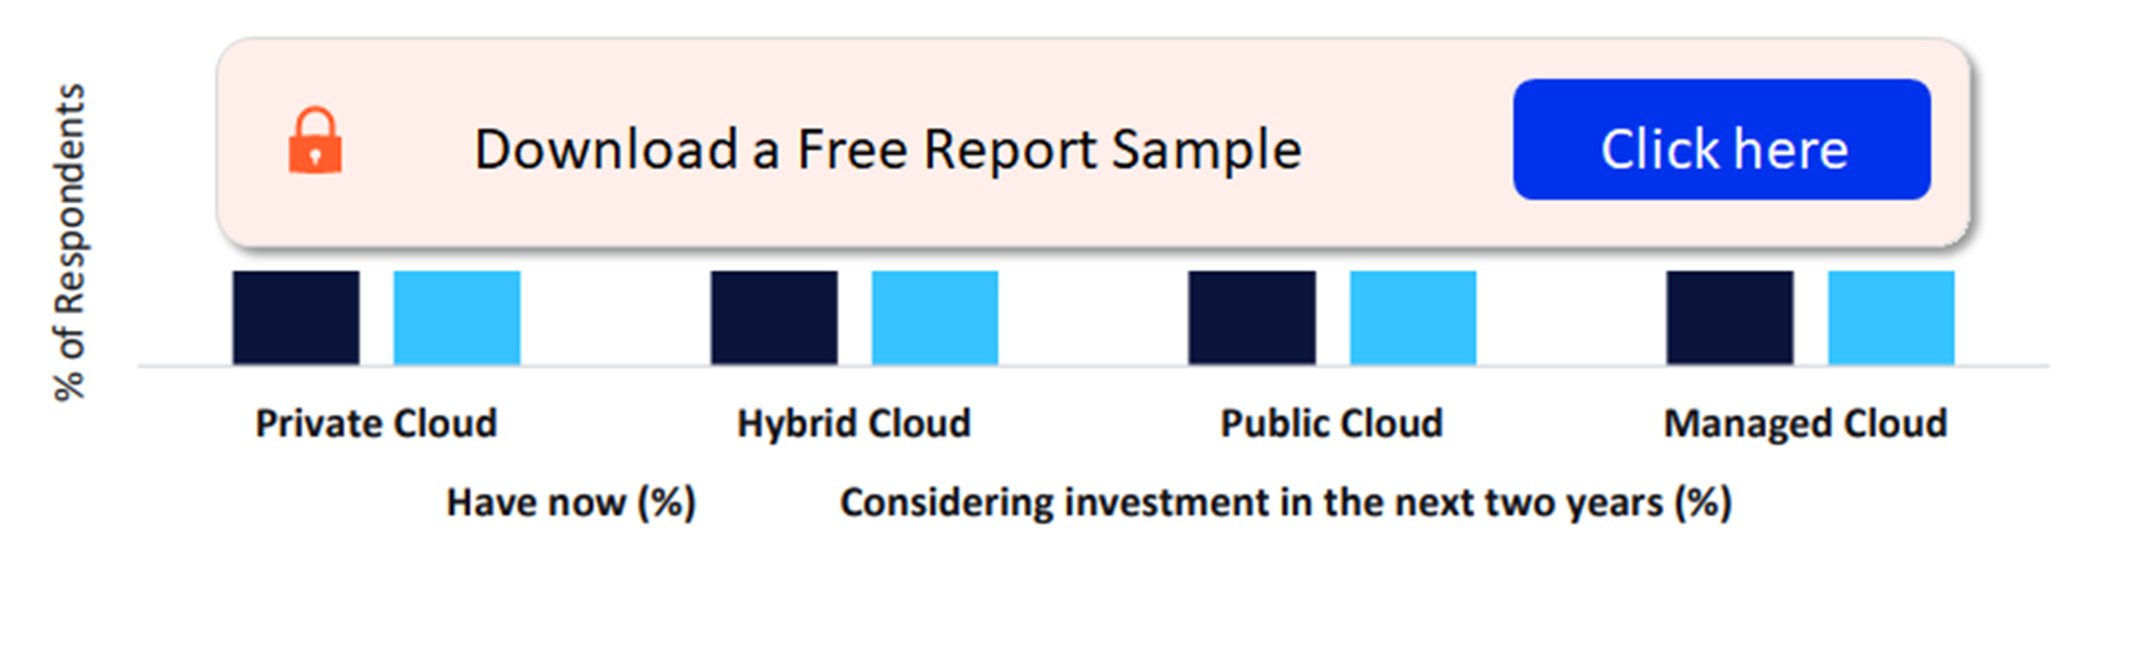 Cloud Computing Technology Investment Priority – Current vs Next Two Years